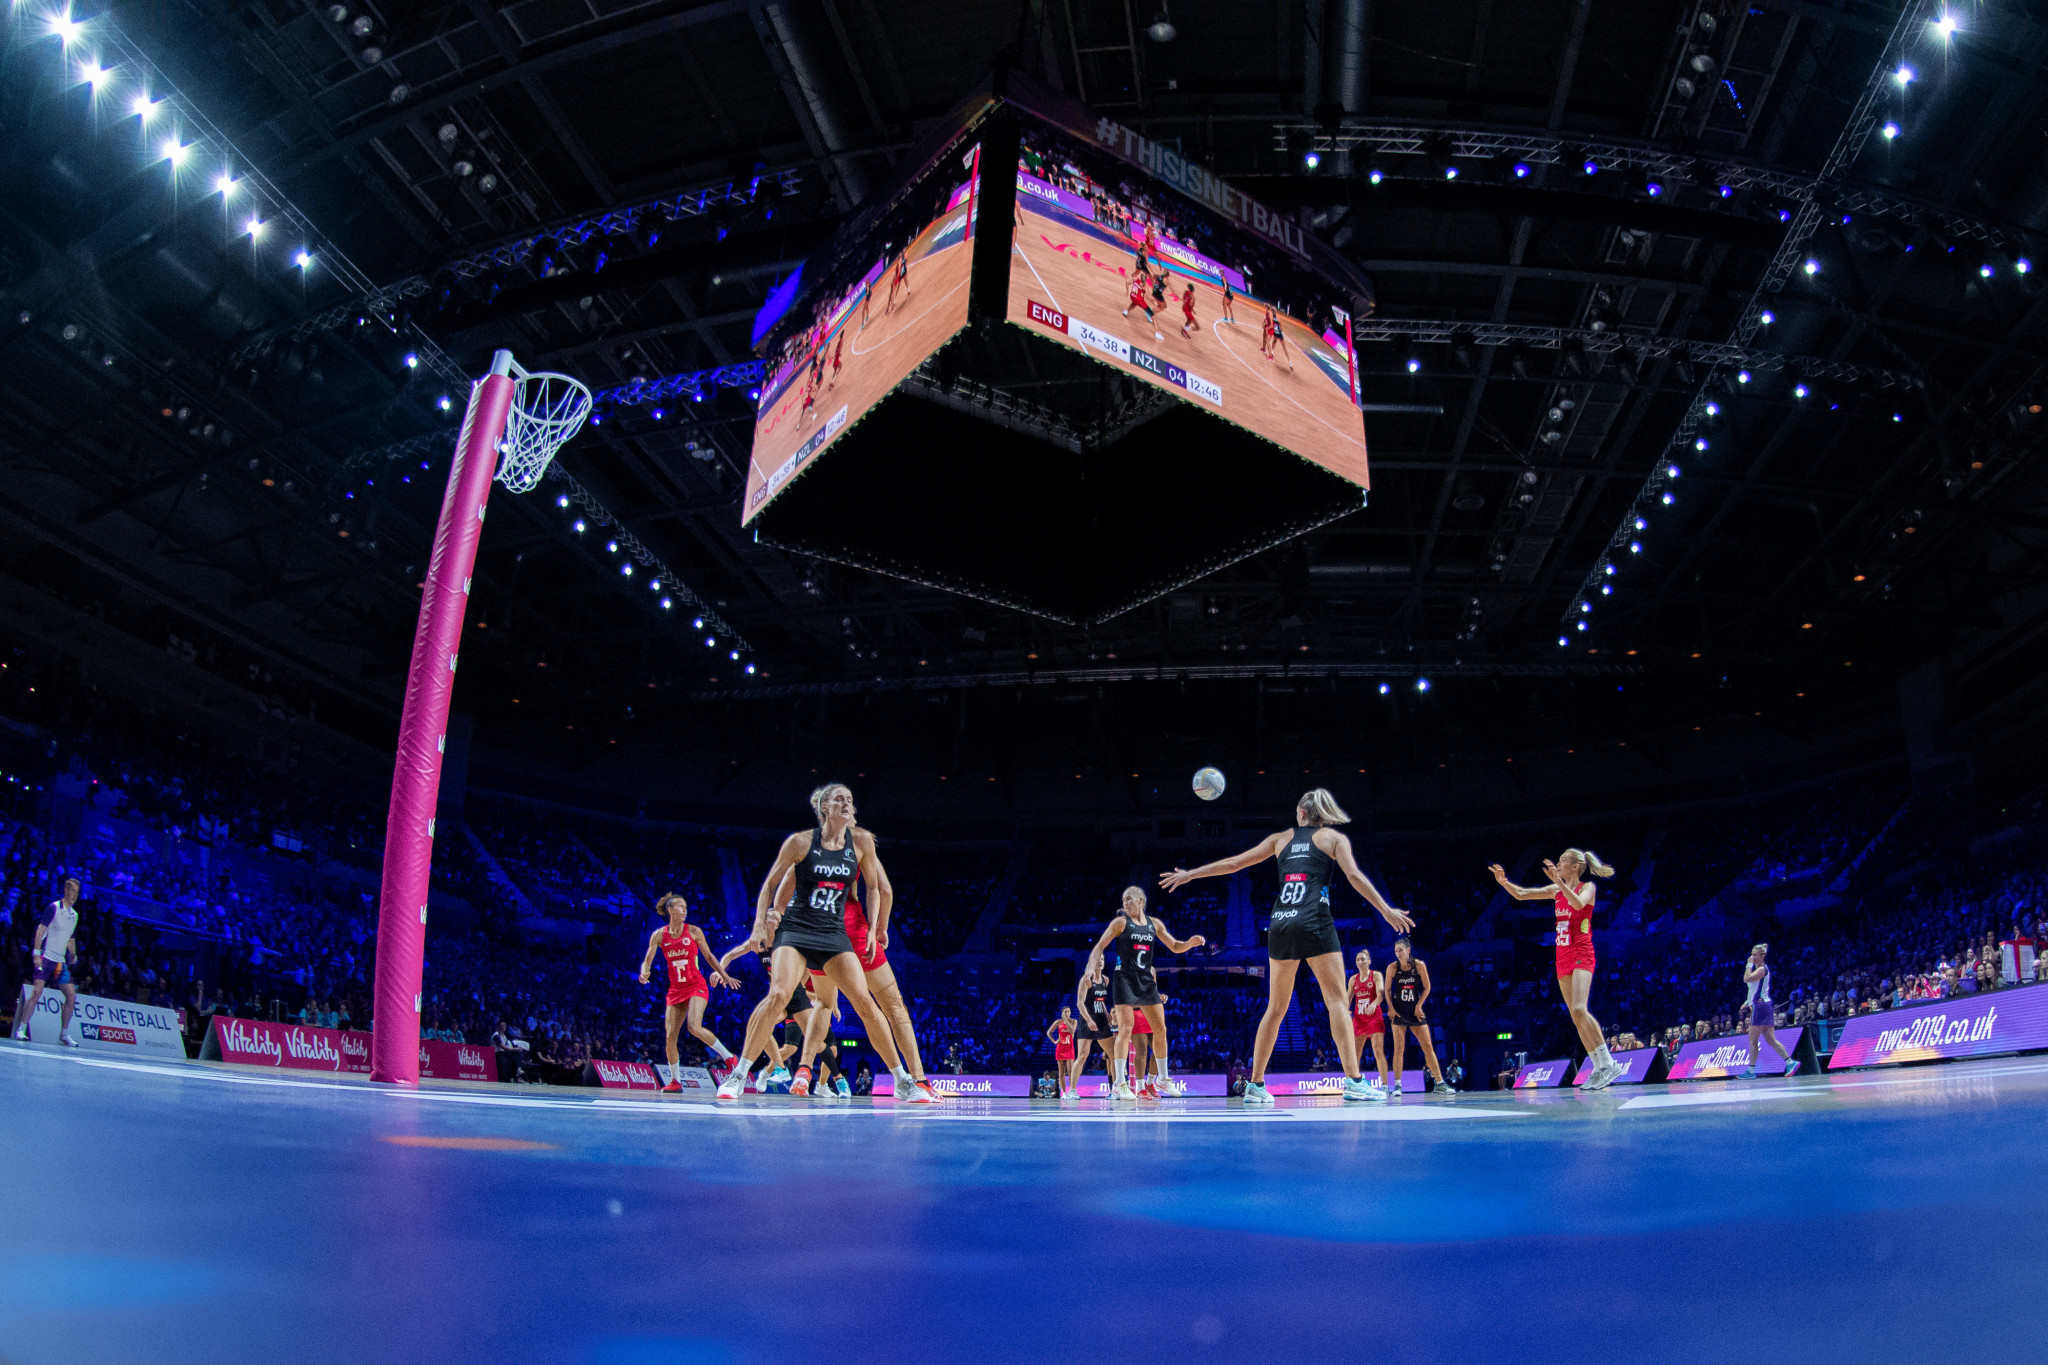 World Netball hires marketing agency CSM key to lead World Cup sponsorship sales